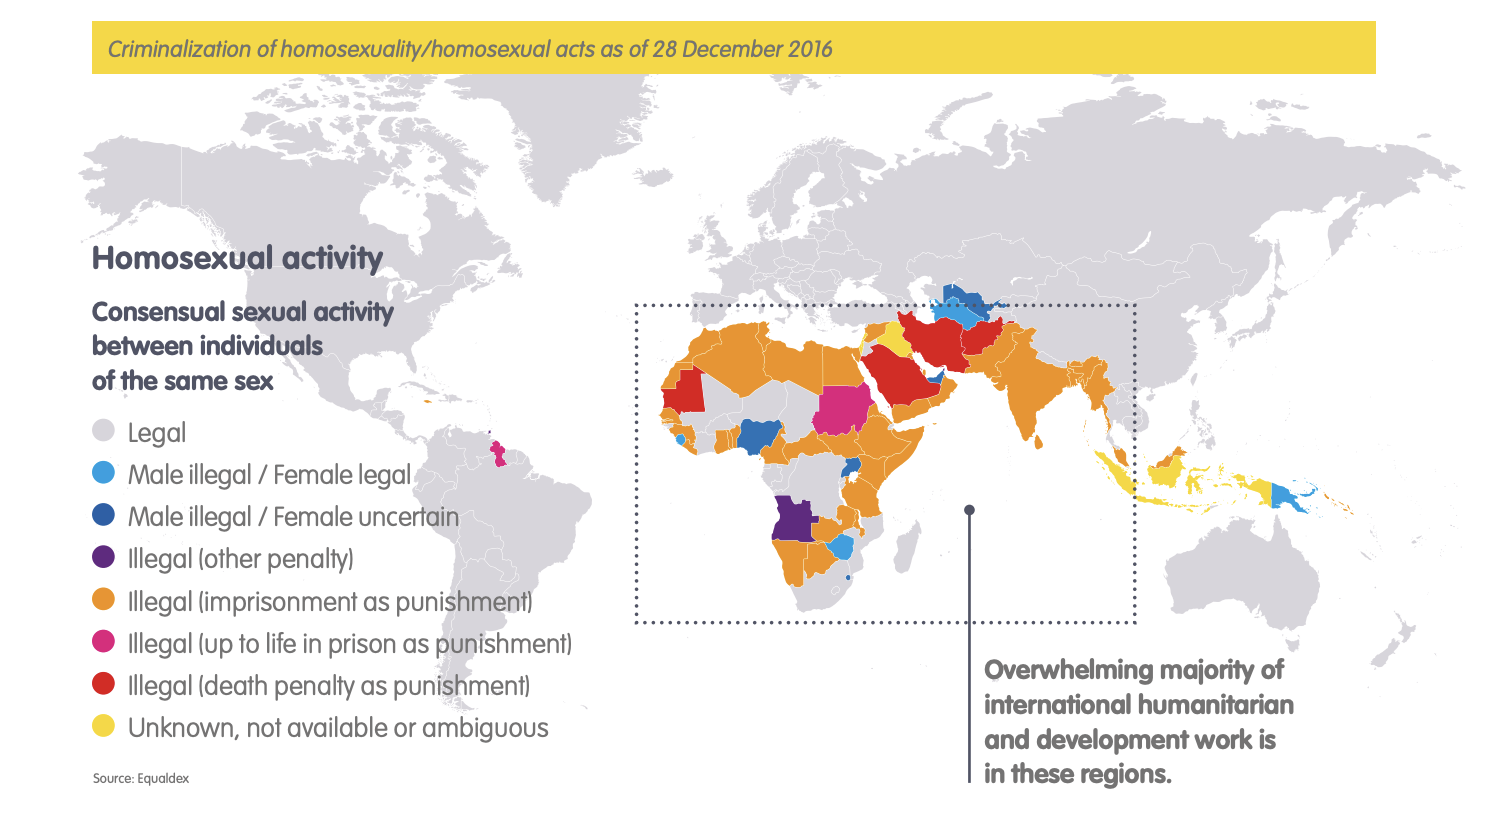 Criminalization of Homosexuality/Homosexual Acts as of December 2016